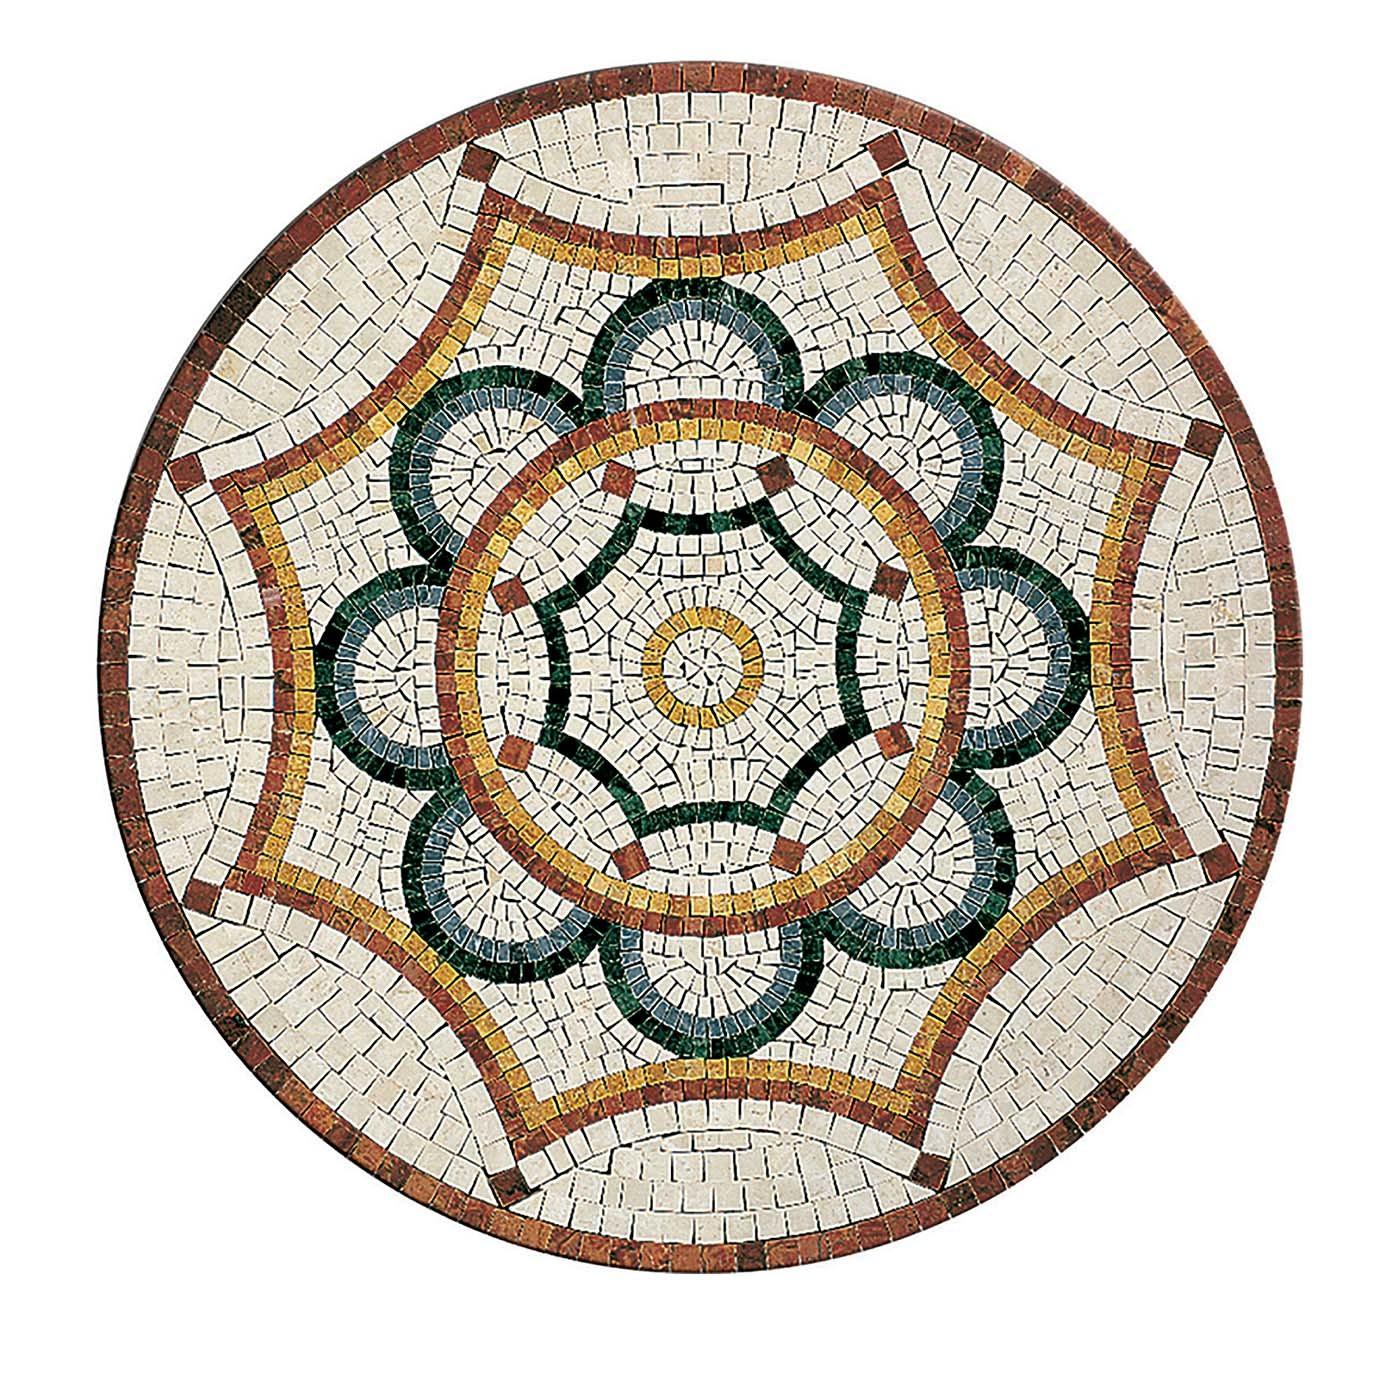 This artistic marble mosaic is mounted on fiberglass mesh applied on a honeycomb-shaped, aluminum base and surrounded by an aluminum frame. It features a polished finish, but is also available in antique, honed and brushed finishes, and customizable